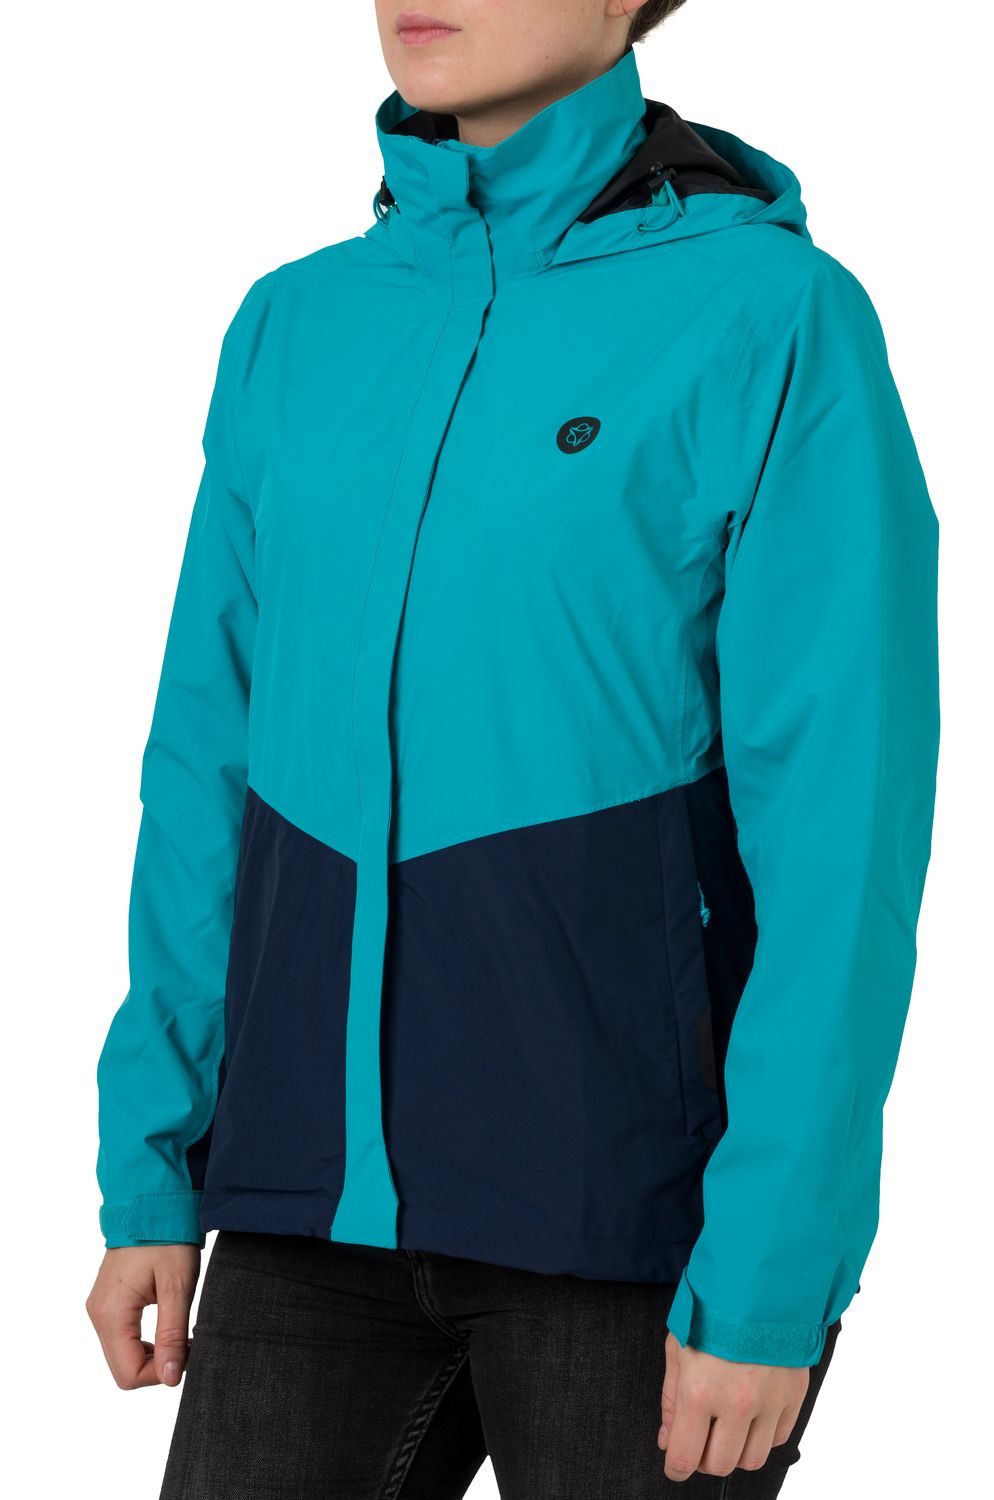 Section Rain Jacket Essential Women fit example